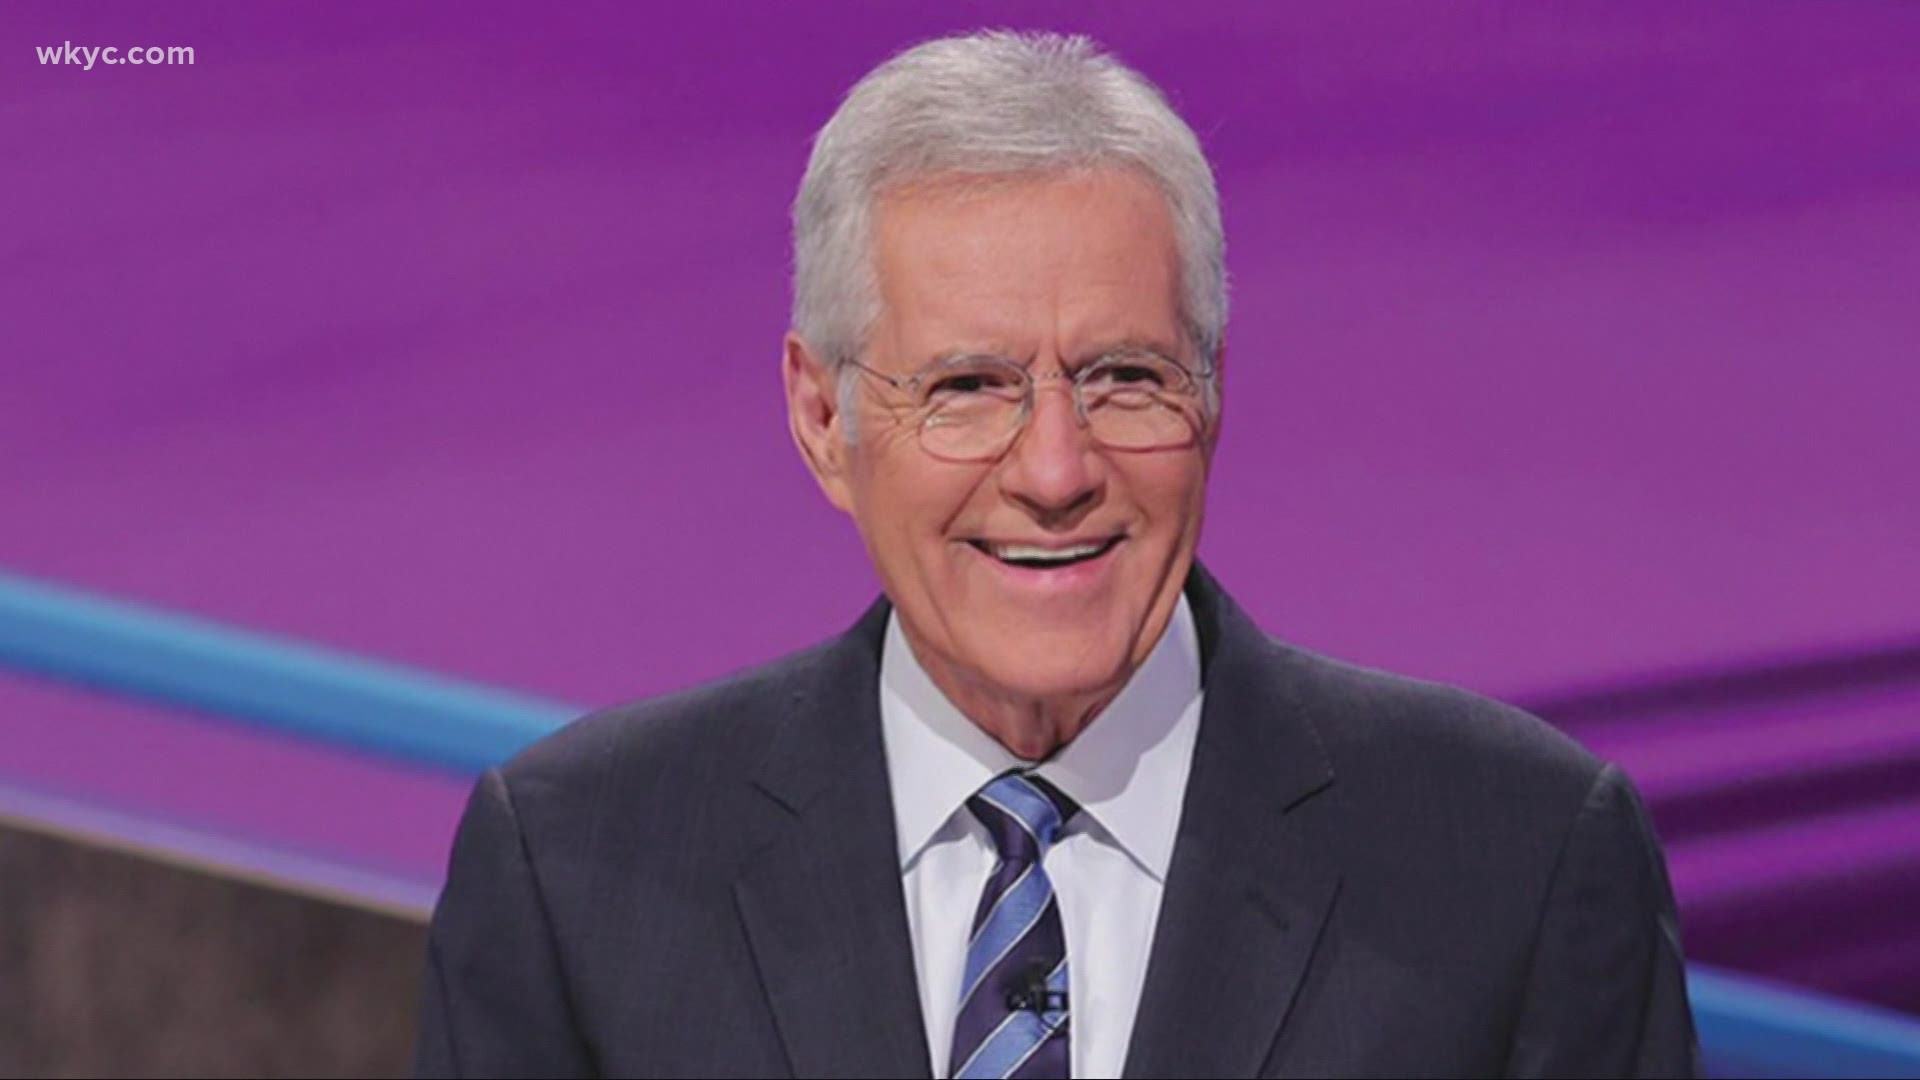 Who's the new 'Jeopardy' host?